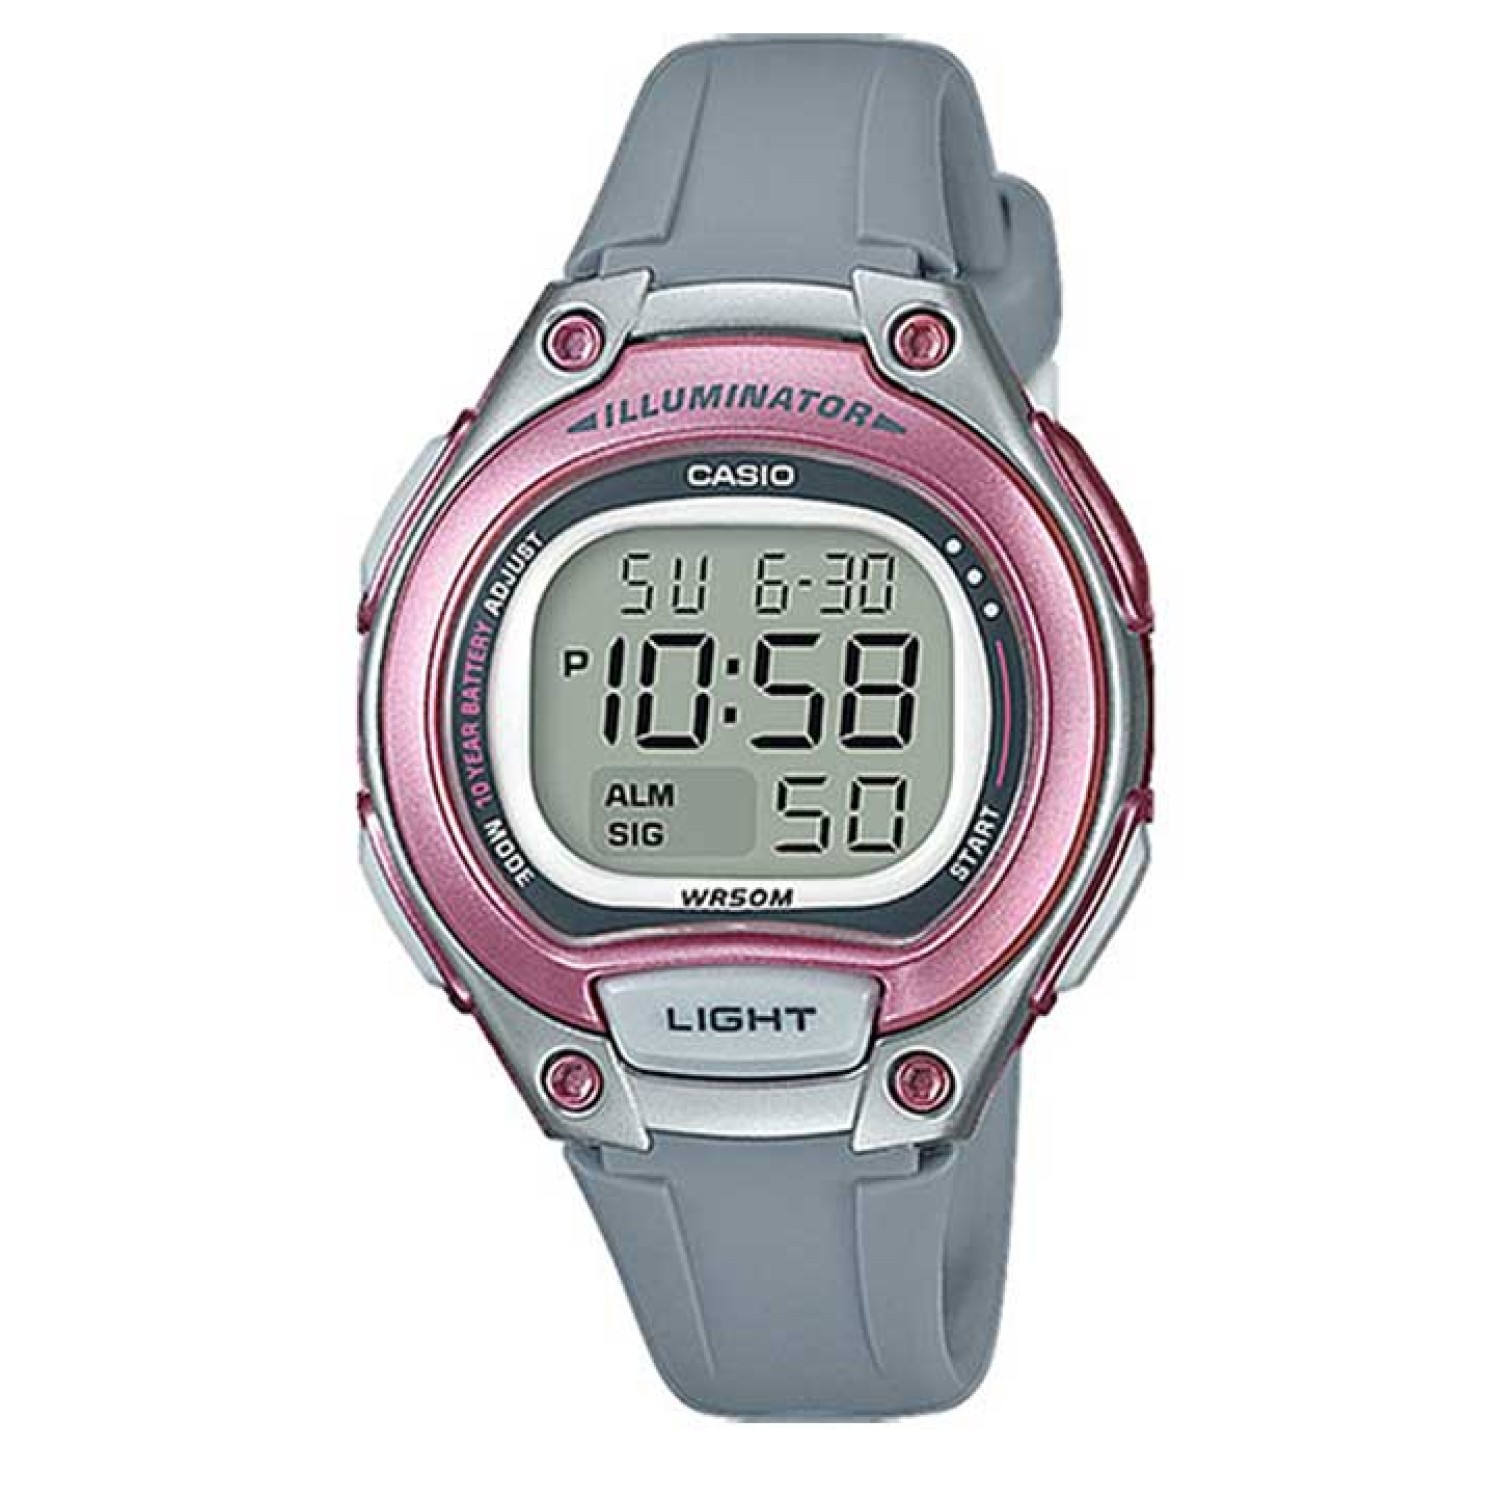 LW203-8A Casio 50 Metres 10 Year Battery Watch. Casio’s Illuminator digital watch is a sleek and sporty timepiece featuring a black plastic resin band, a metallic resin case and a large digital time display with stopwatch and day and date functions. Water